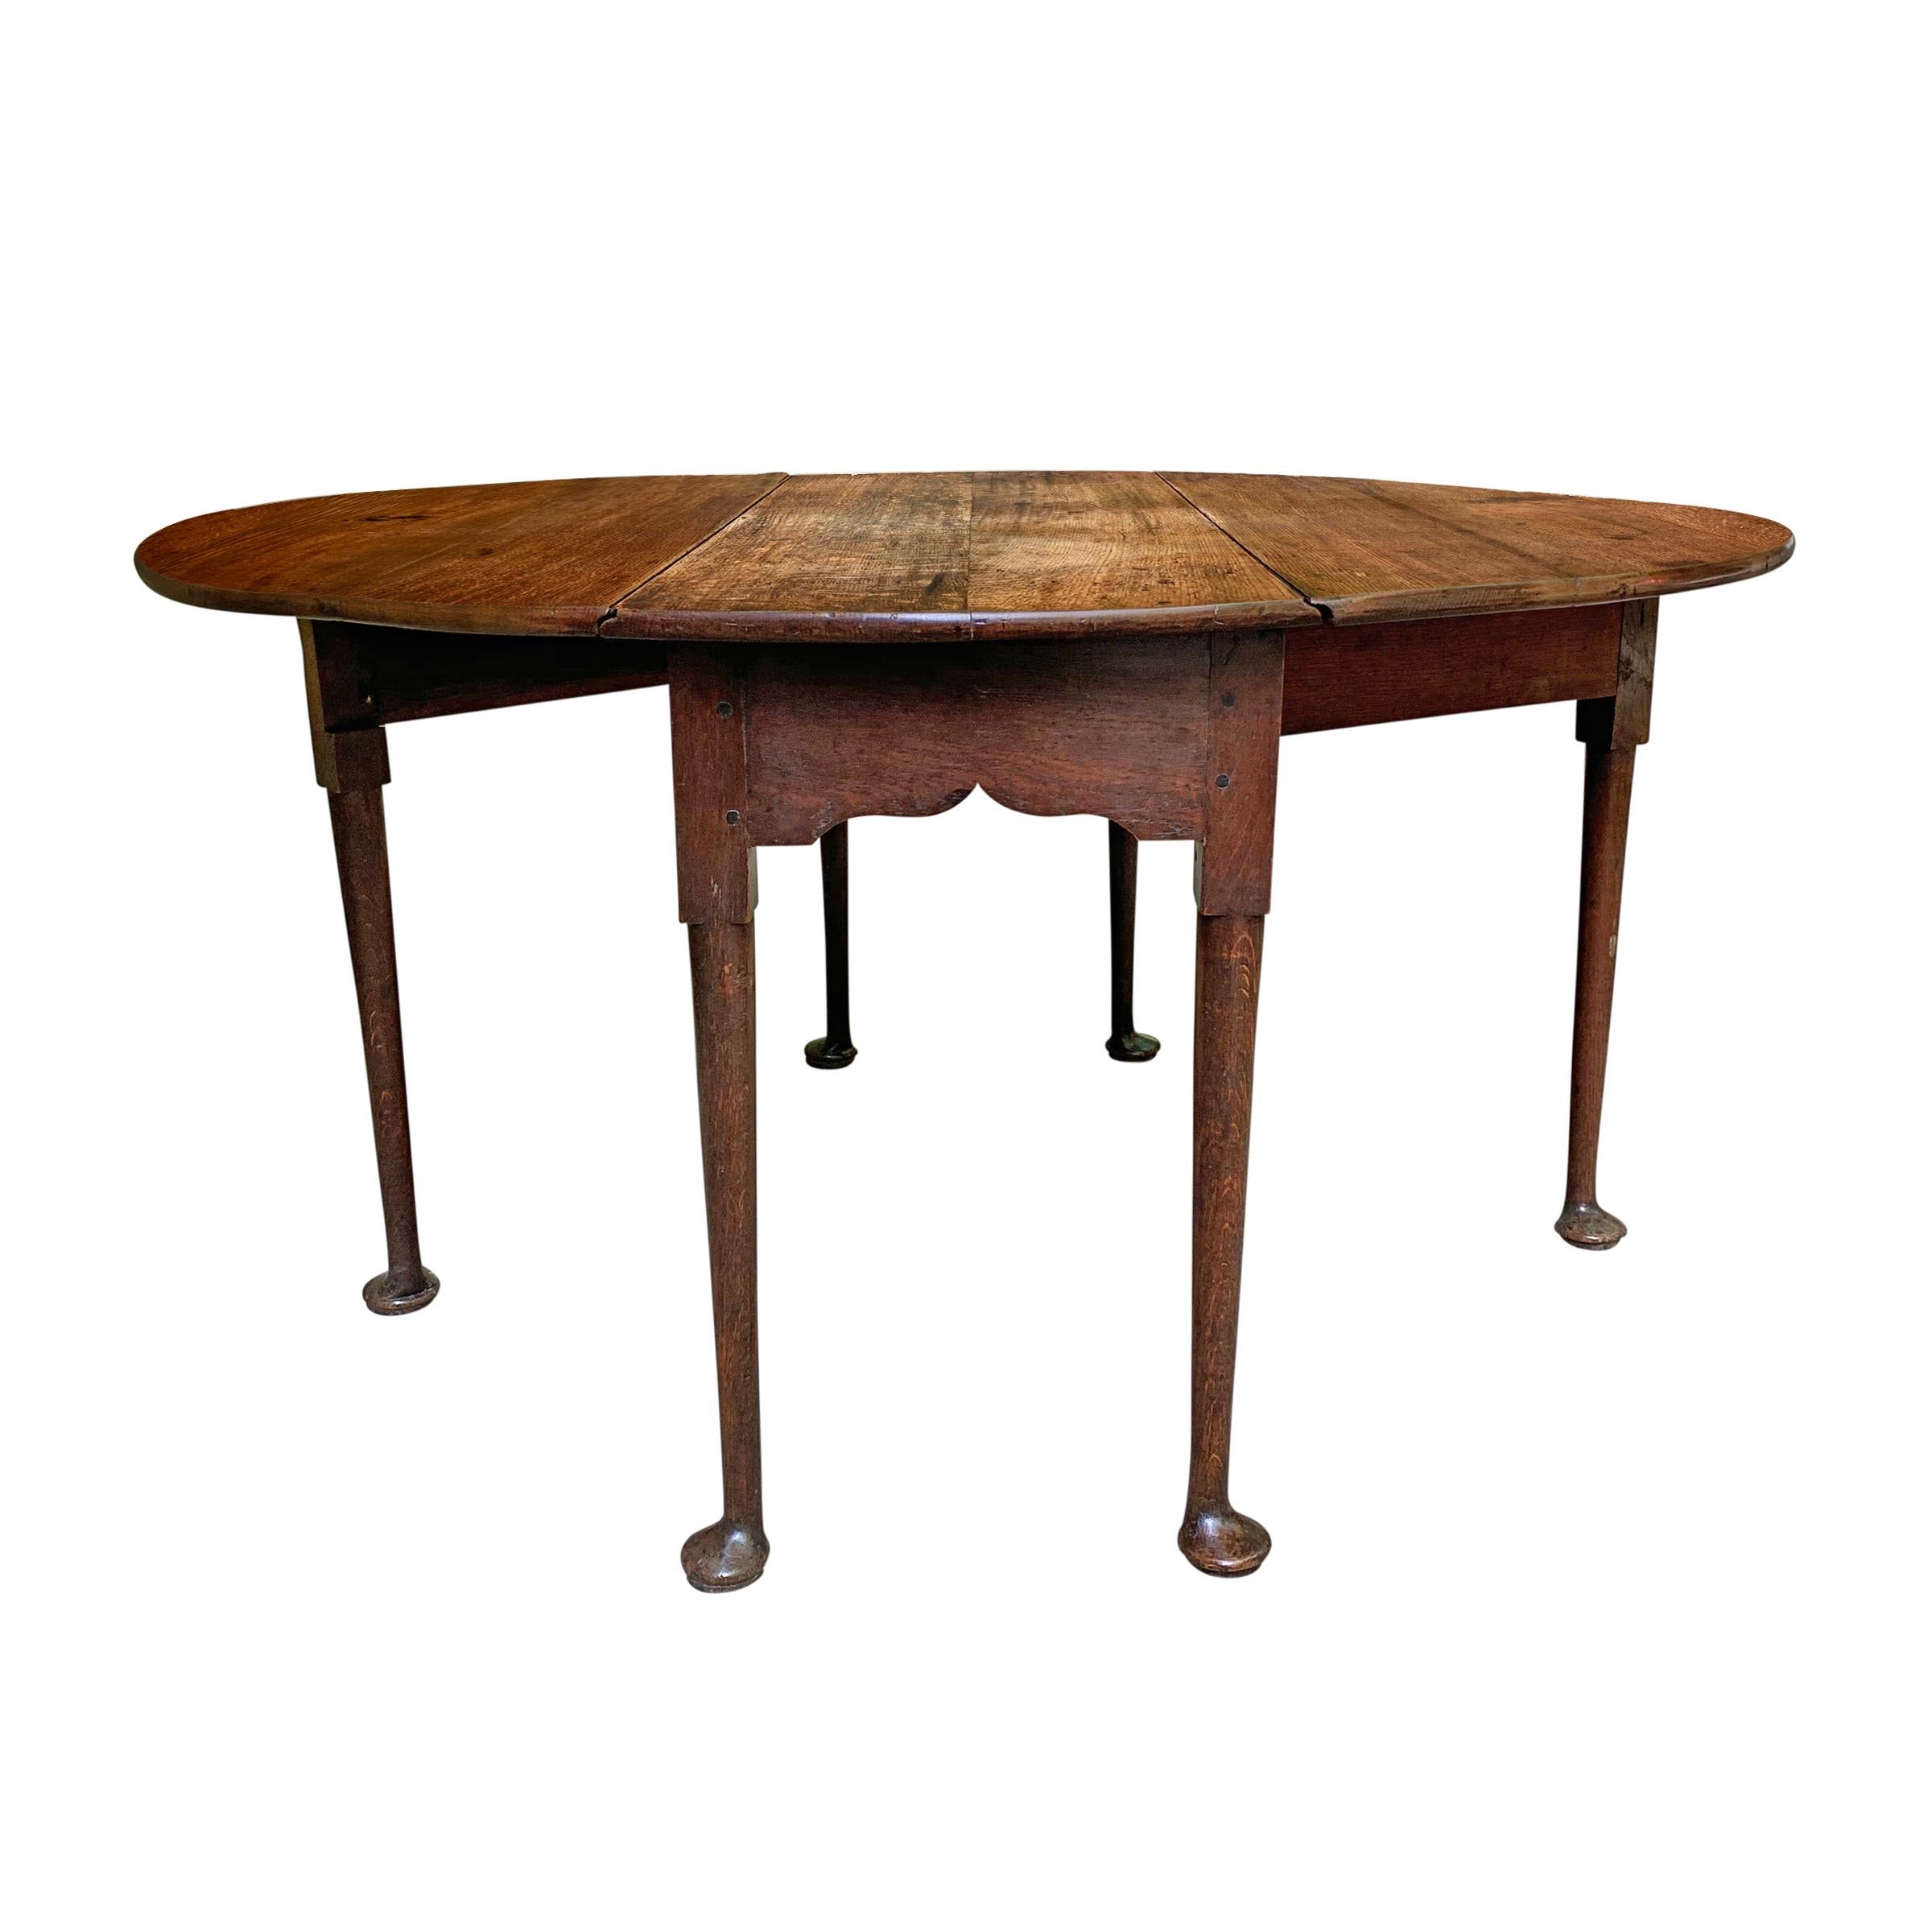 British Early 19th Century English Queen Anne Gate-Leg Table